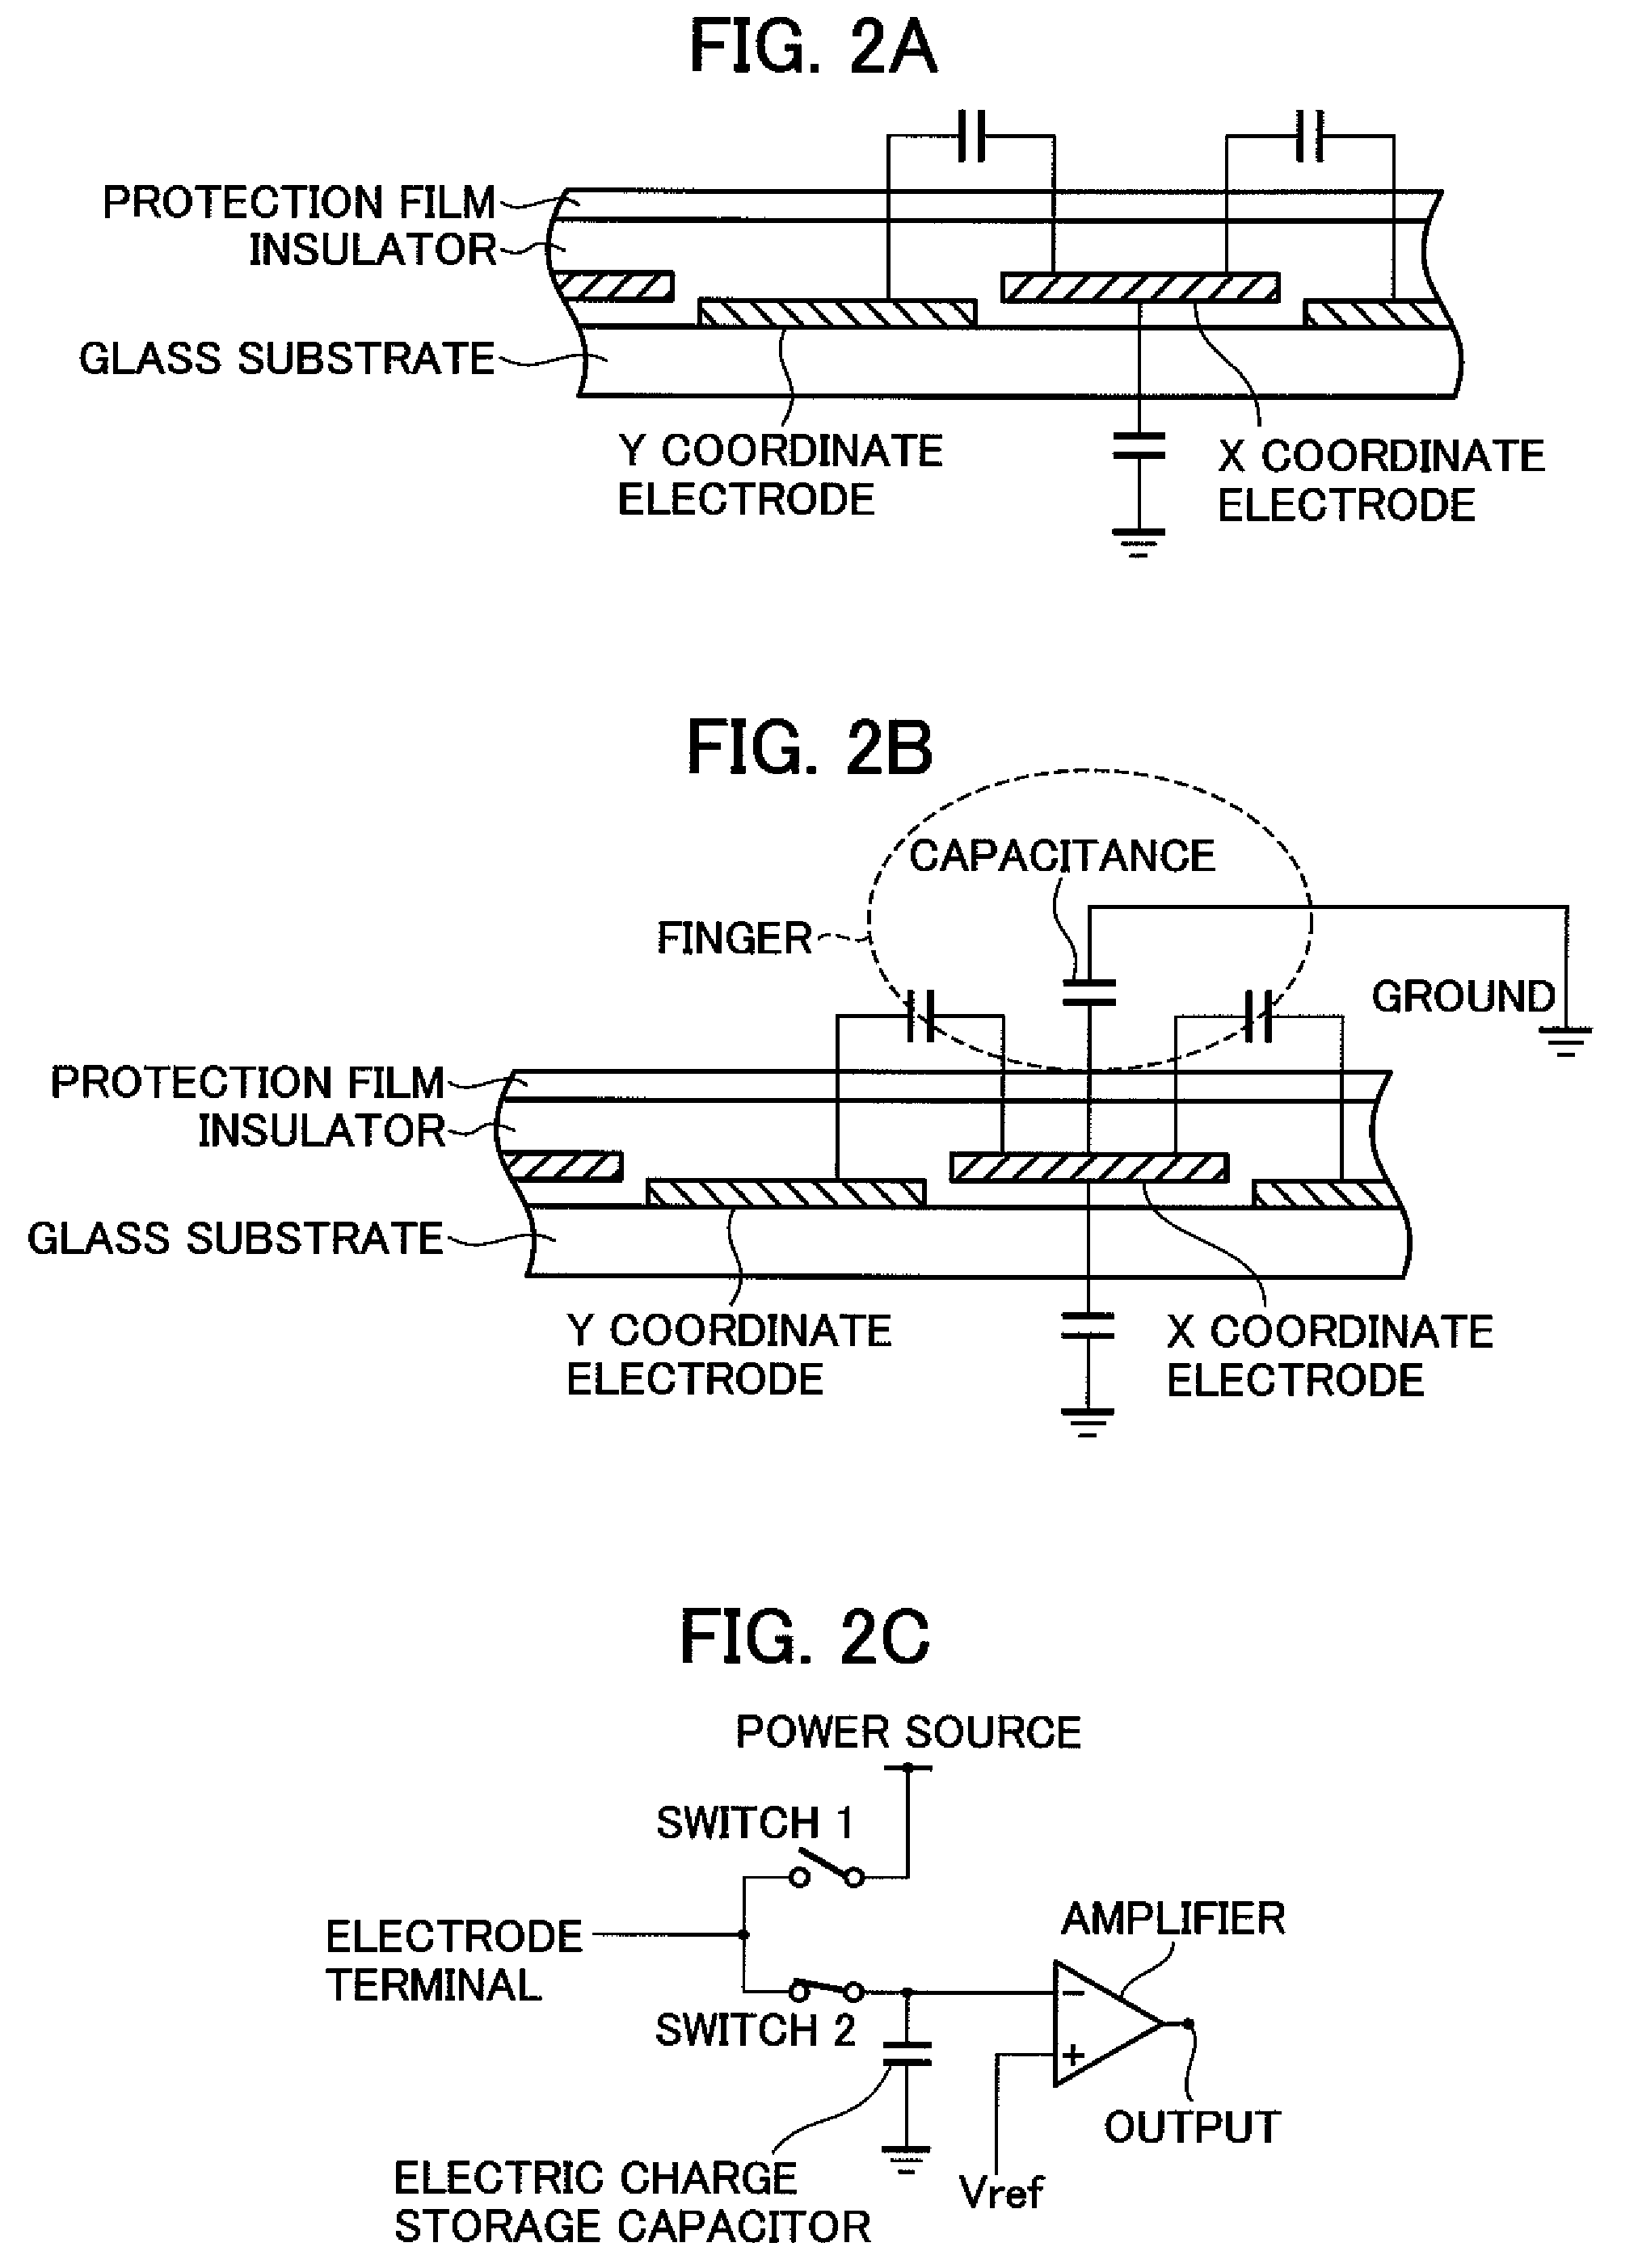 Coordinate input device and display device with the same